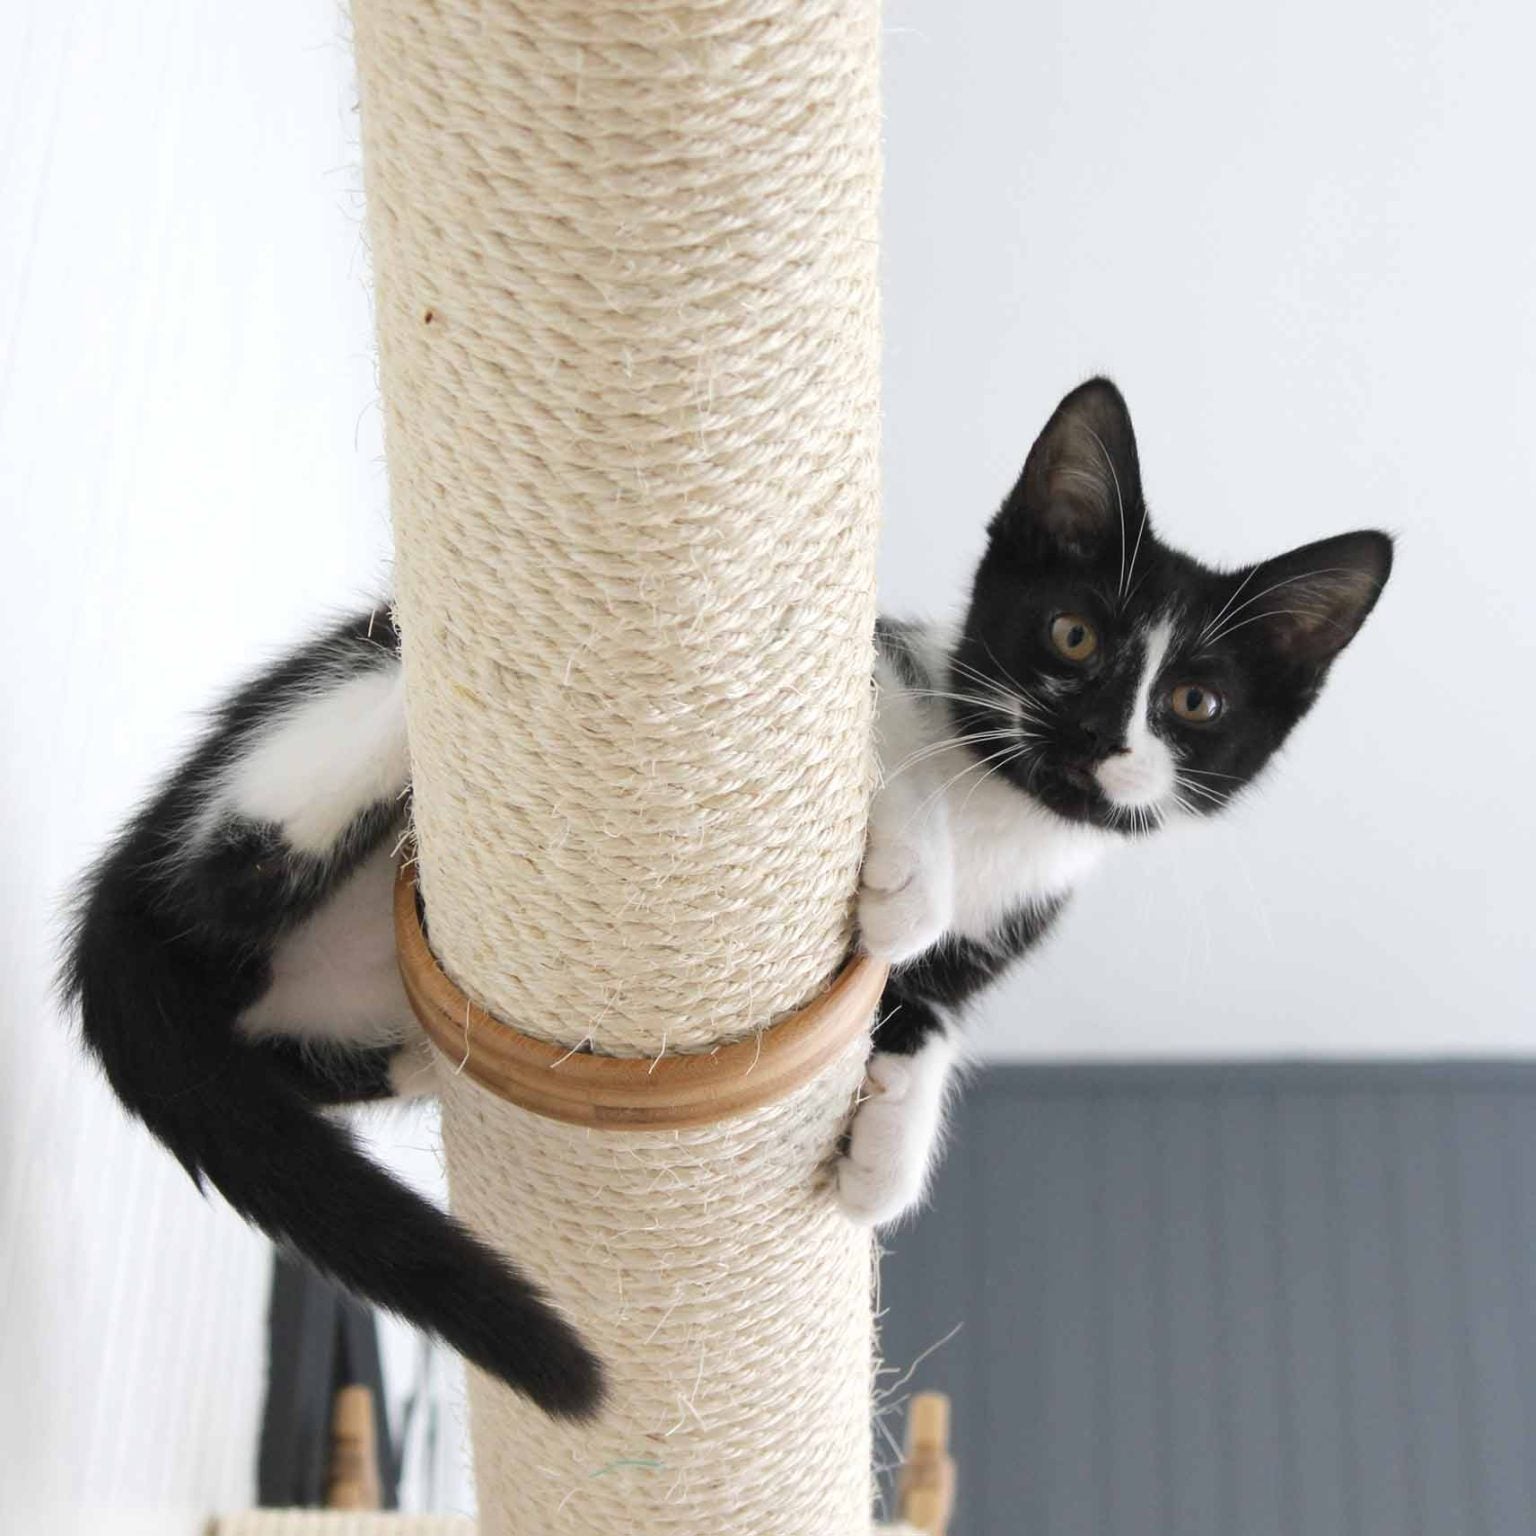 Black and white kitten wrapped over a Horizontal Pole.